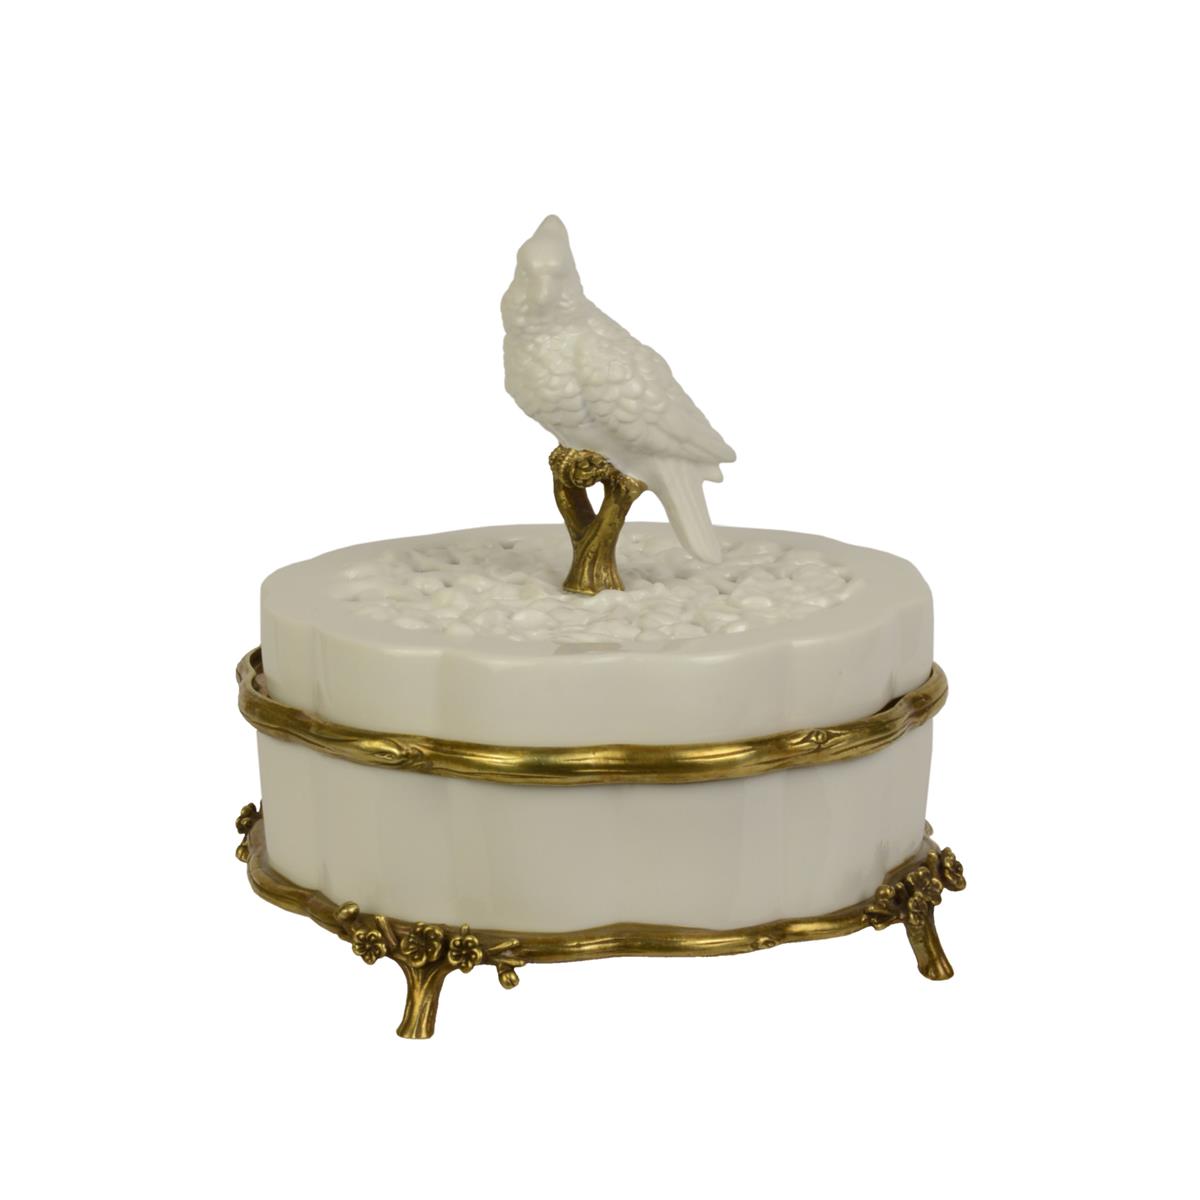 A BRASS MOUNTED CHINE DE BLANC PORC.BOX WITH PIERCED COVER